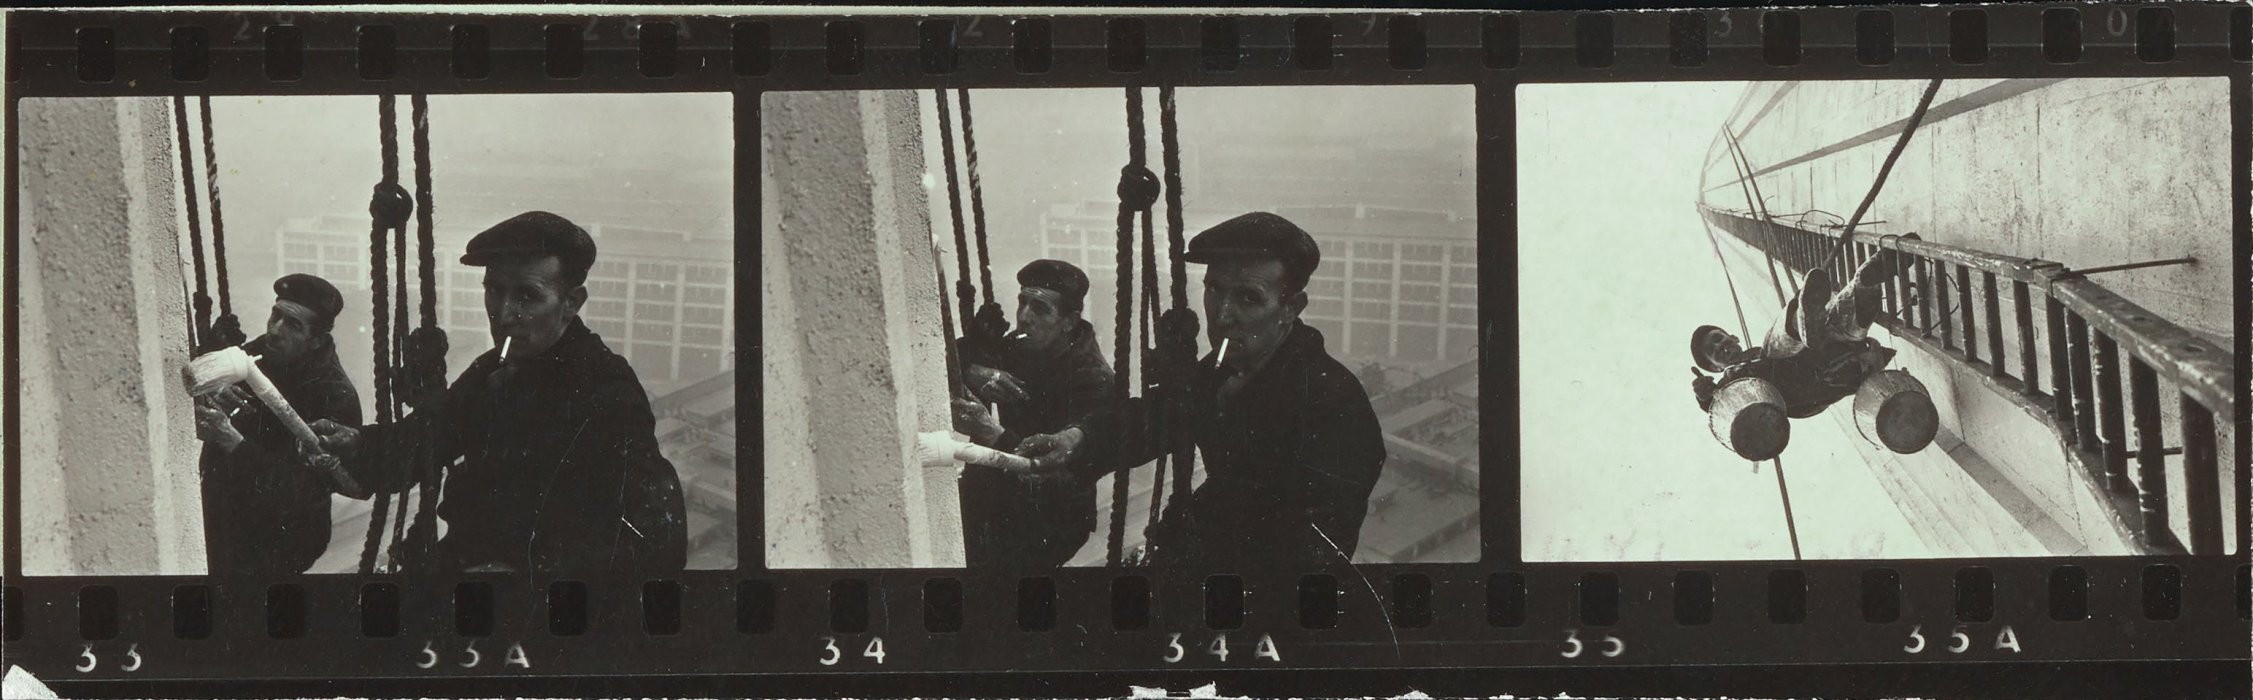 Partial contact sheet featuring images of steeplejacks painting one of the Battersea Power Station chimneys